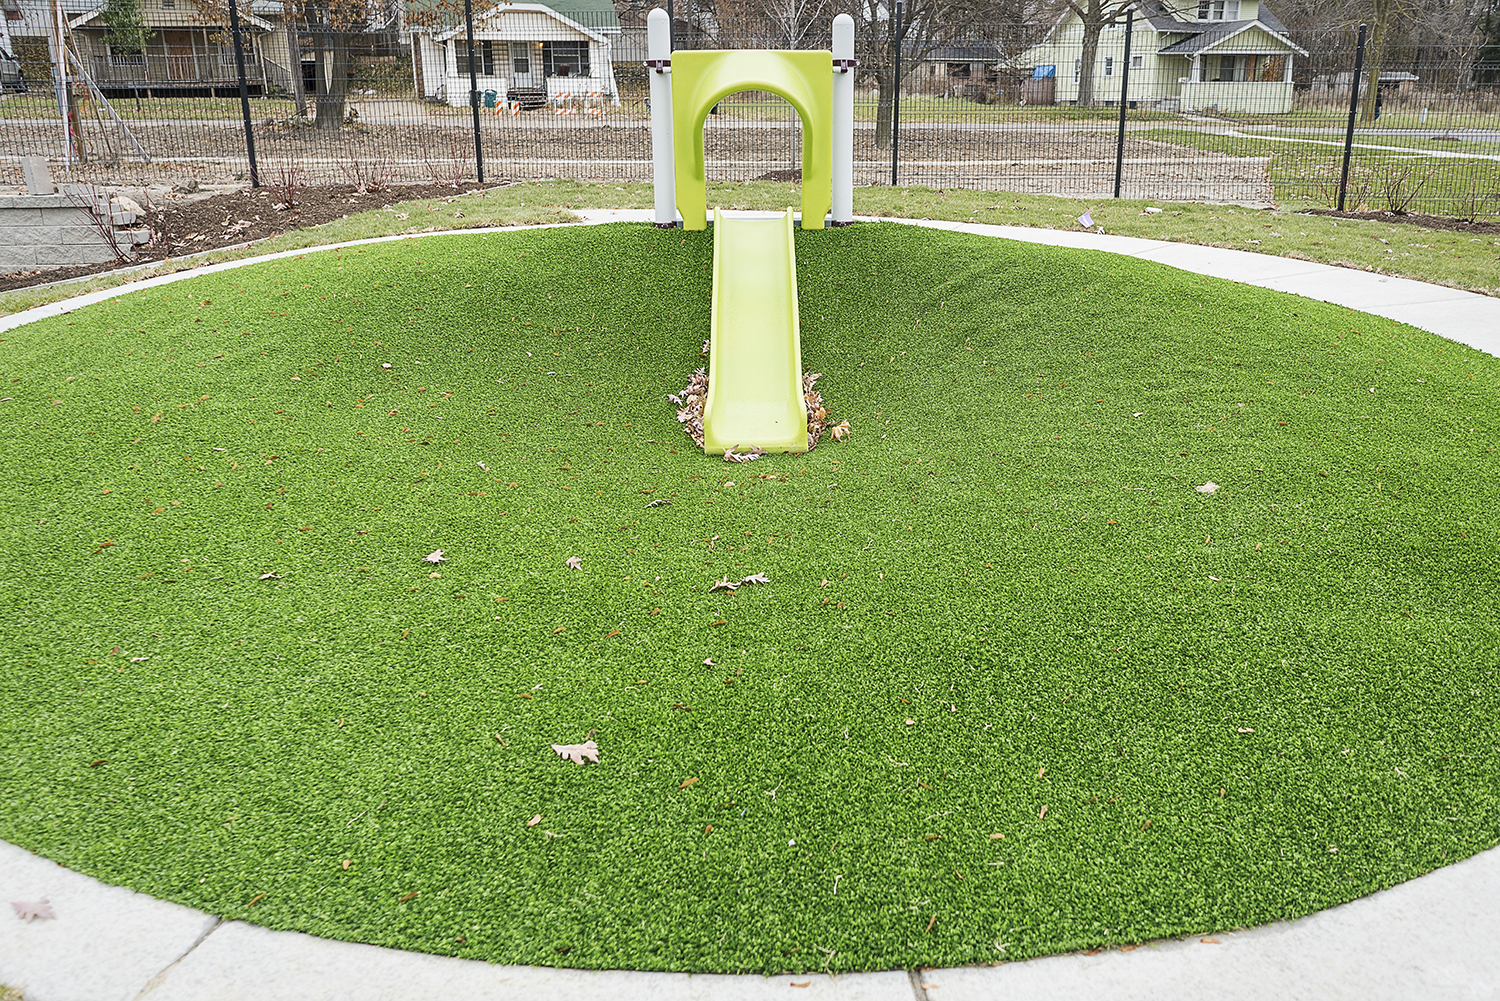 Flint, MI - Tuesday, November 21, 2017: A small slide drops down into a lush field of green grass outside of the new Educare Center in Flint.